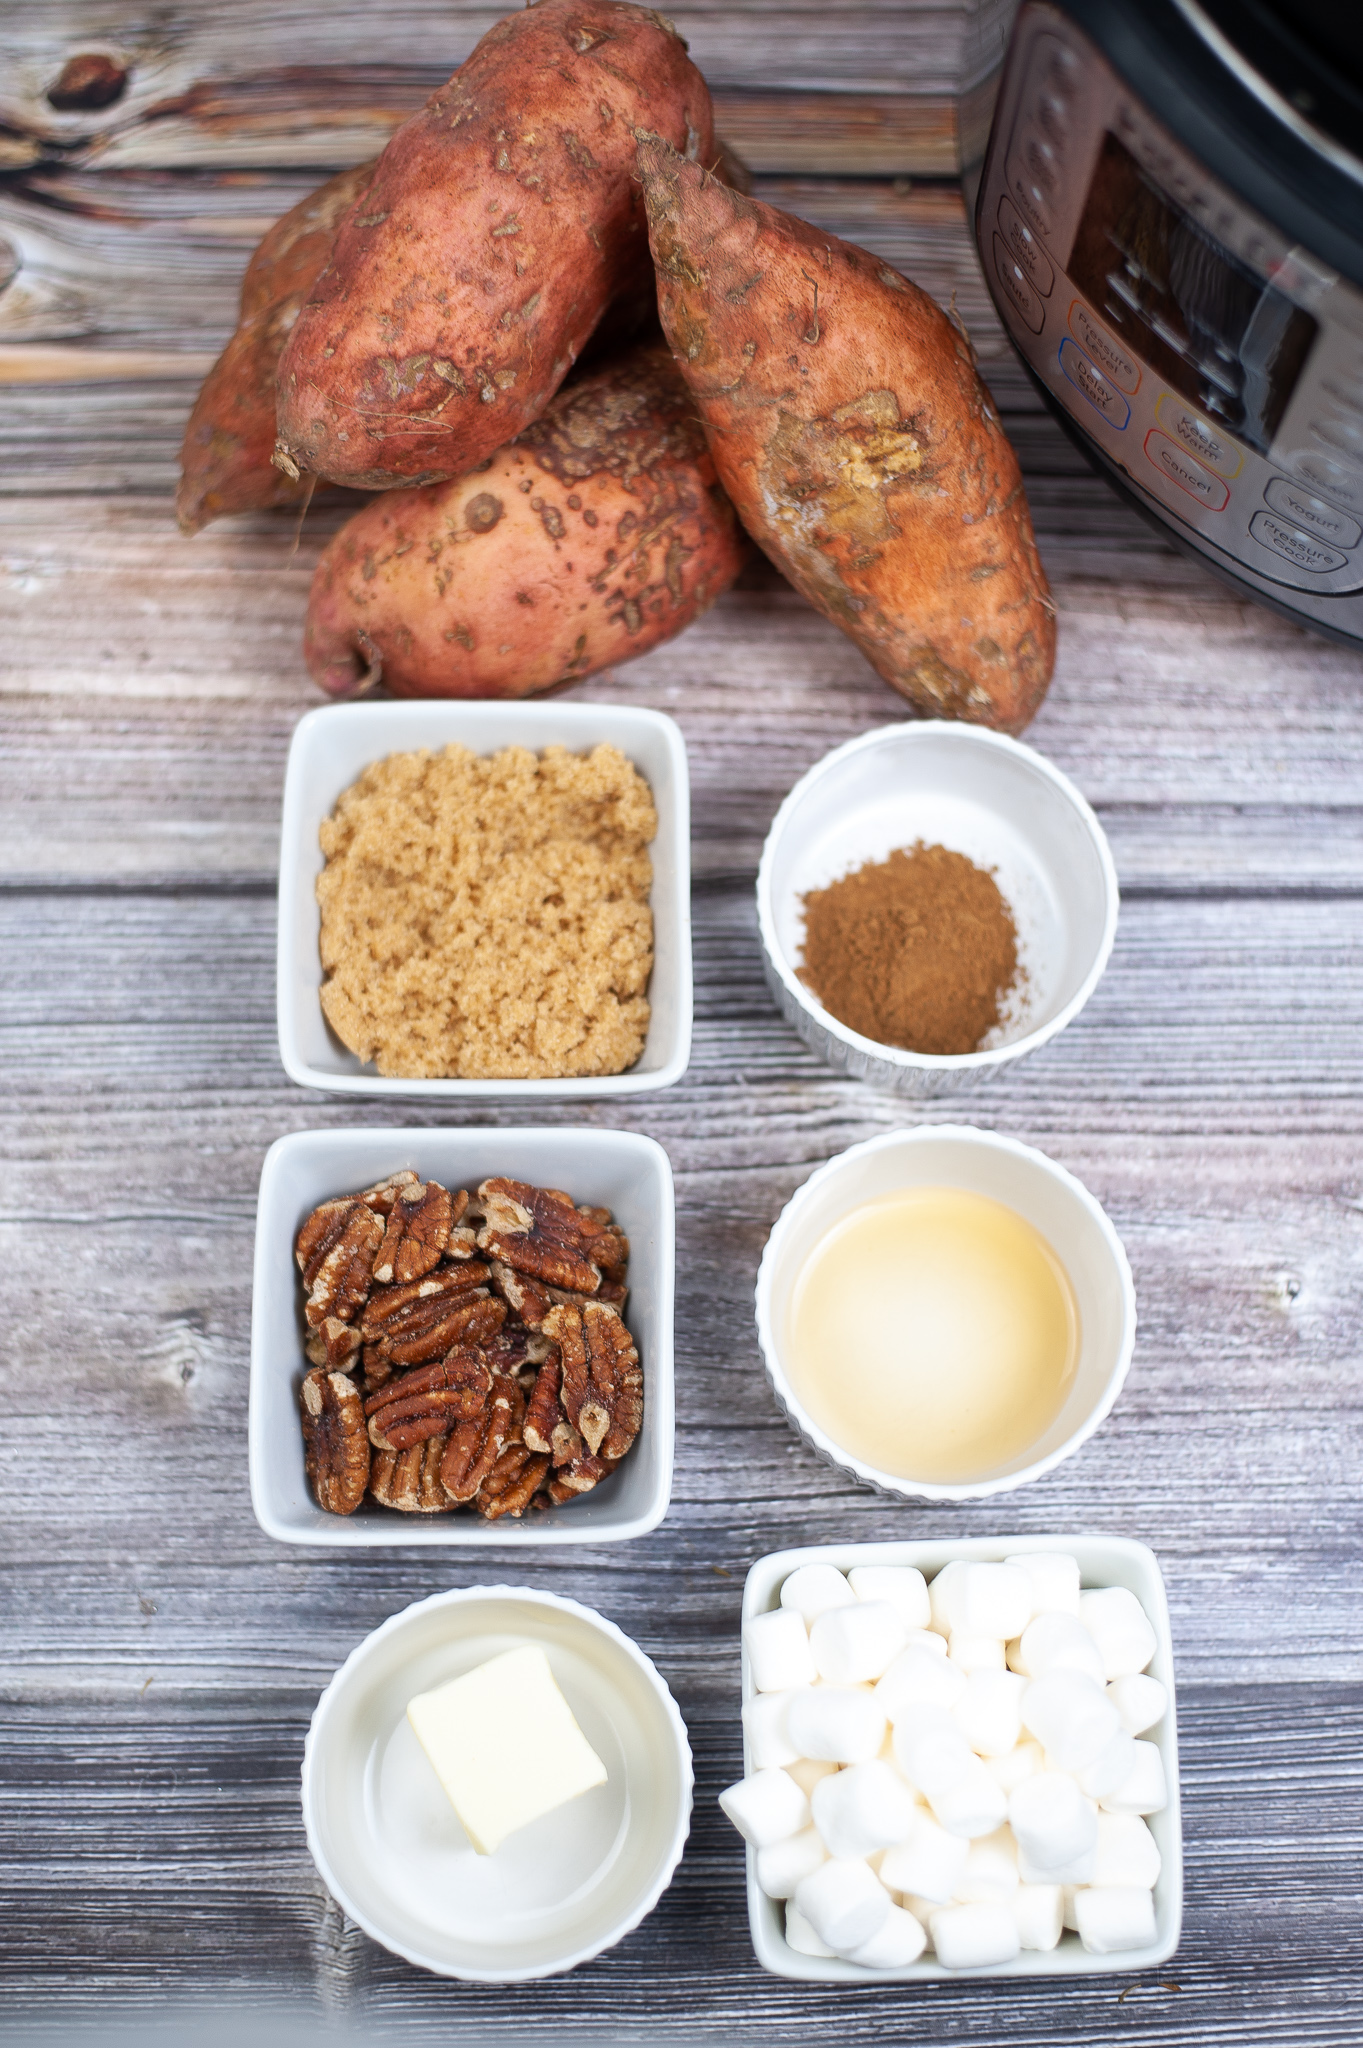 Ingredients in bowls or plates for the sweet potato casserole.